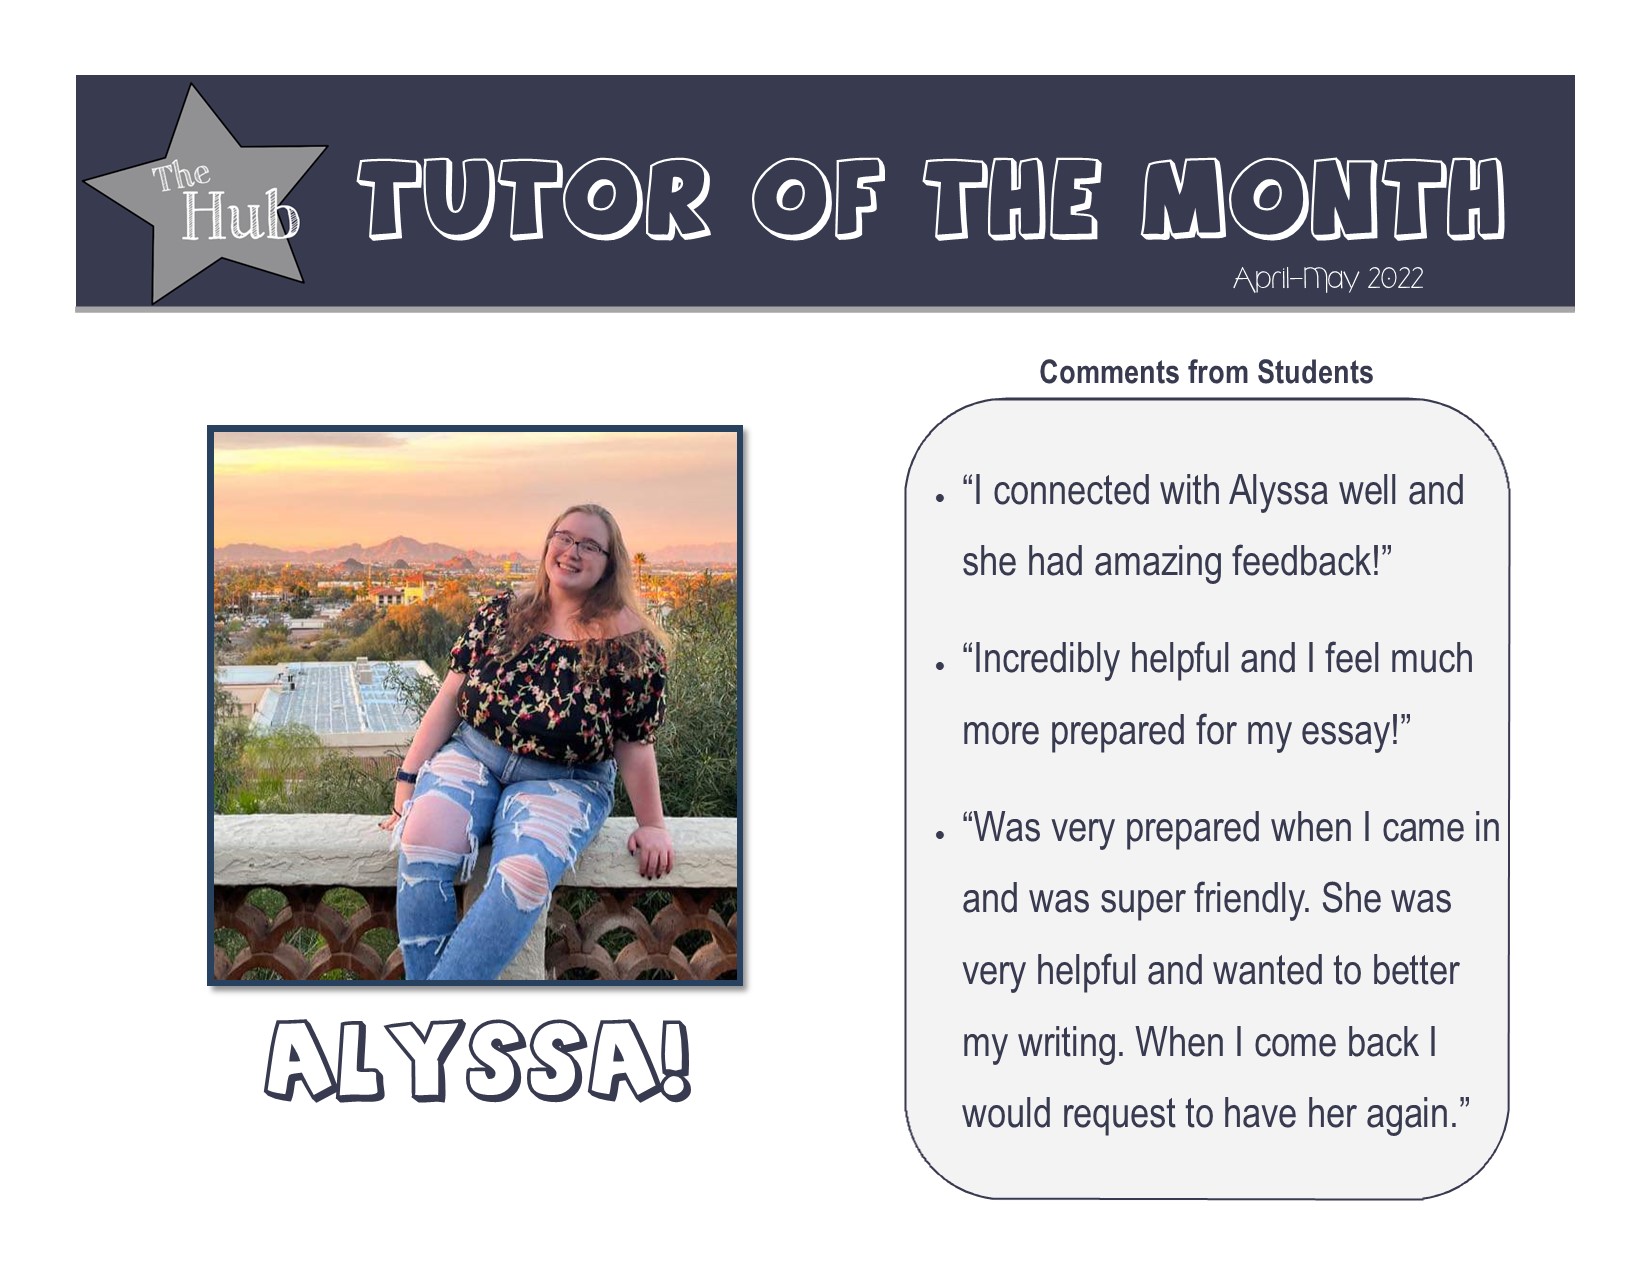 tutor of the month flyer for april to may 2022, alyssa